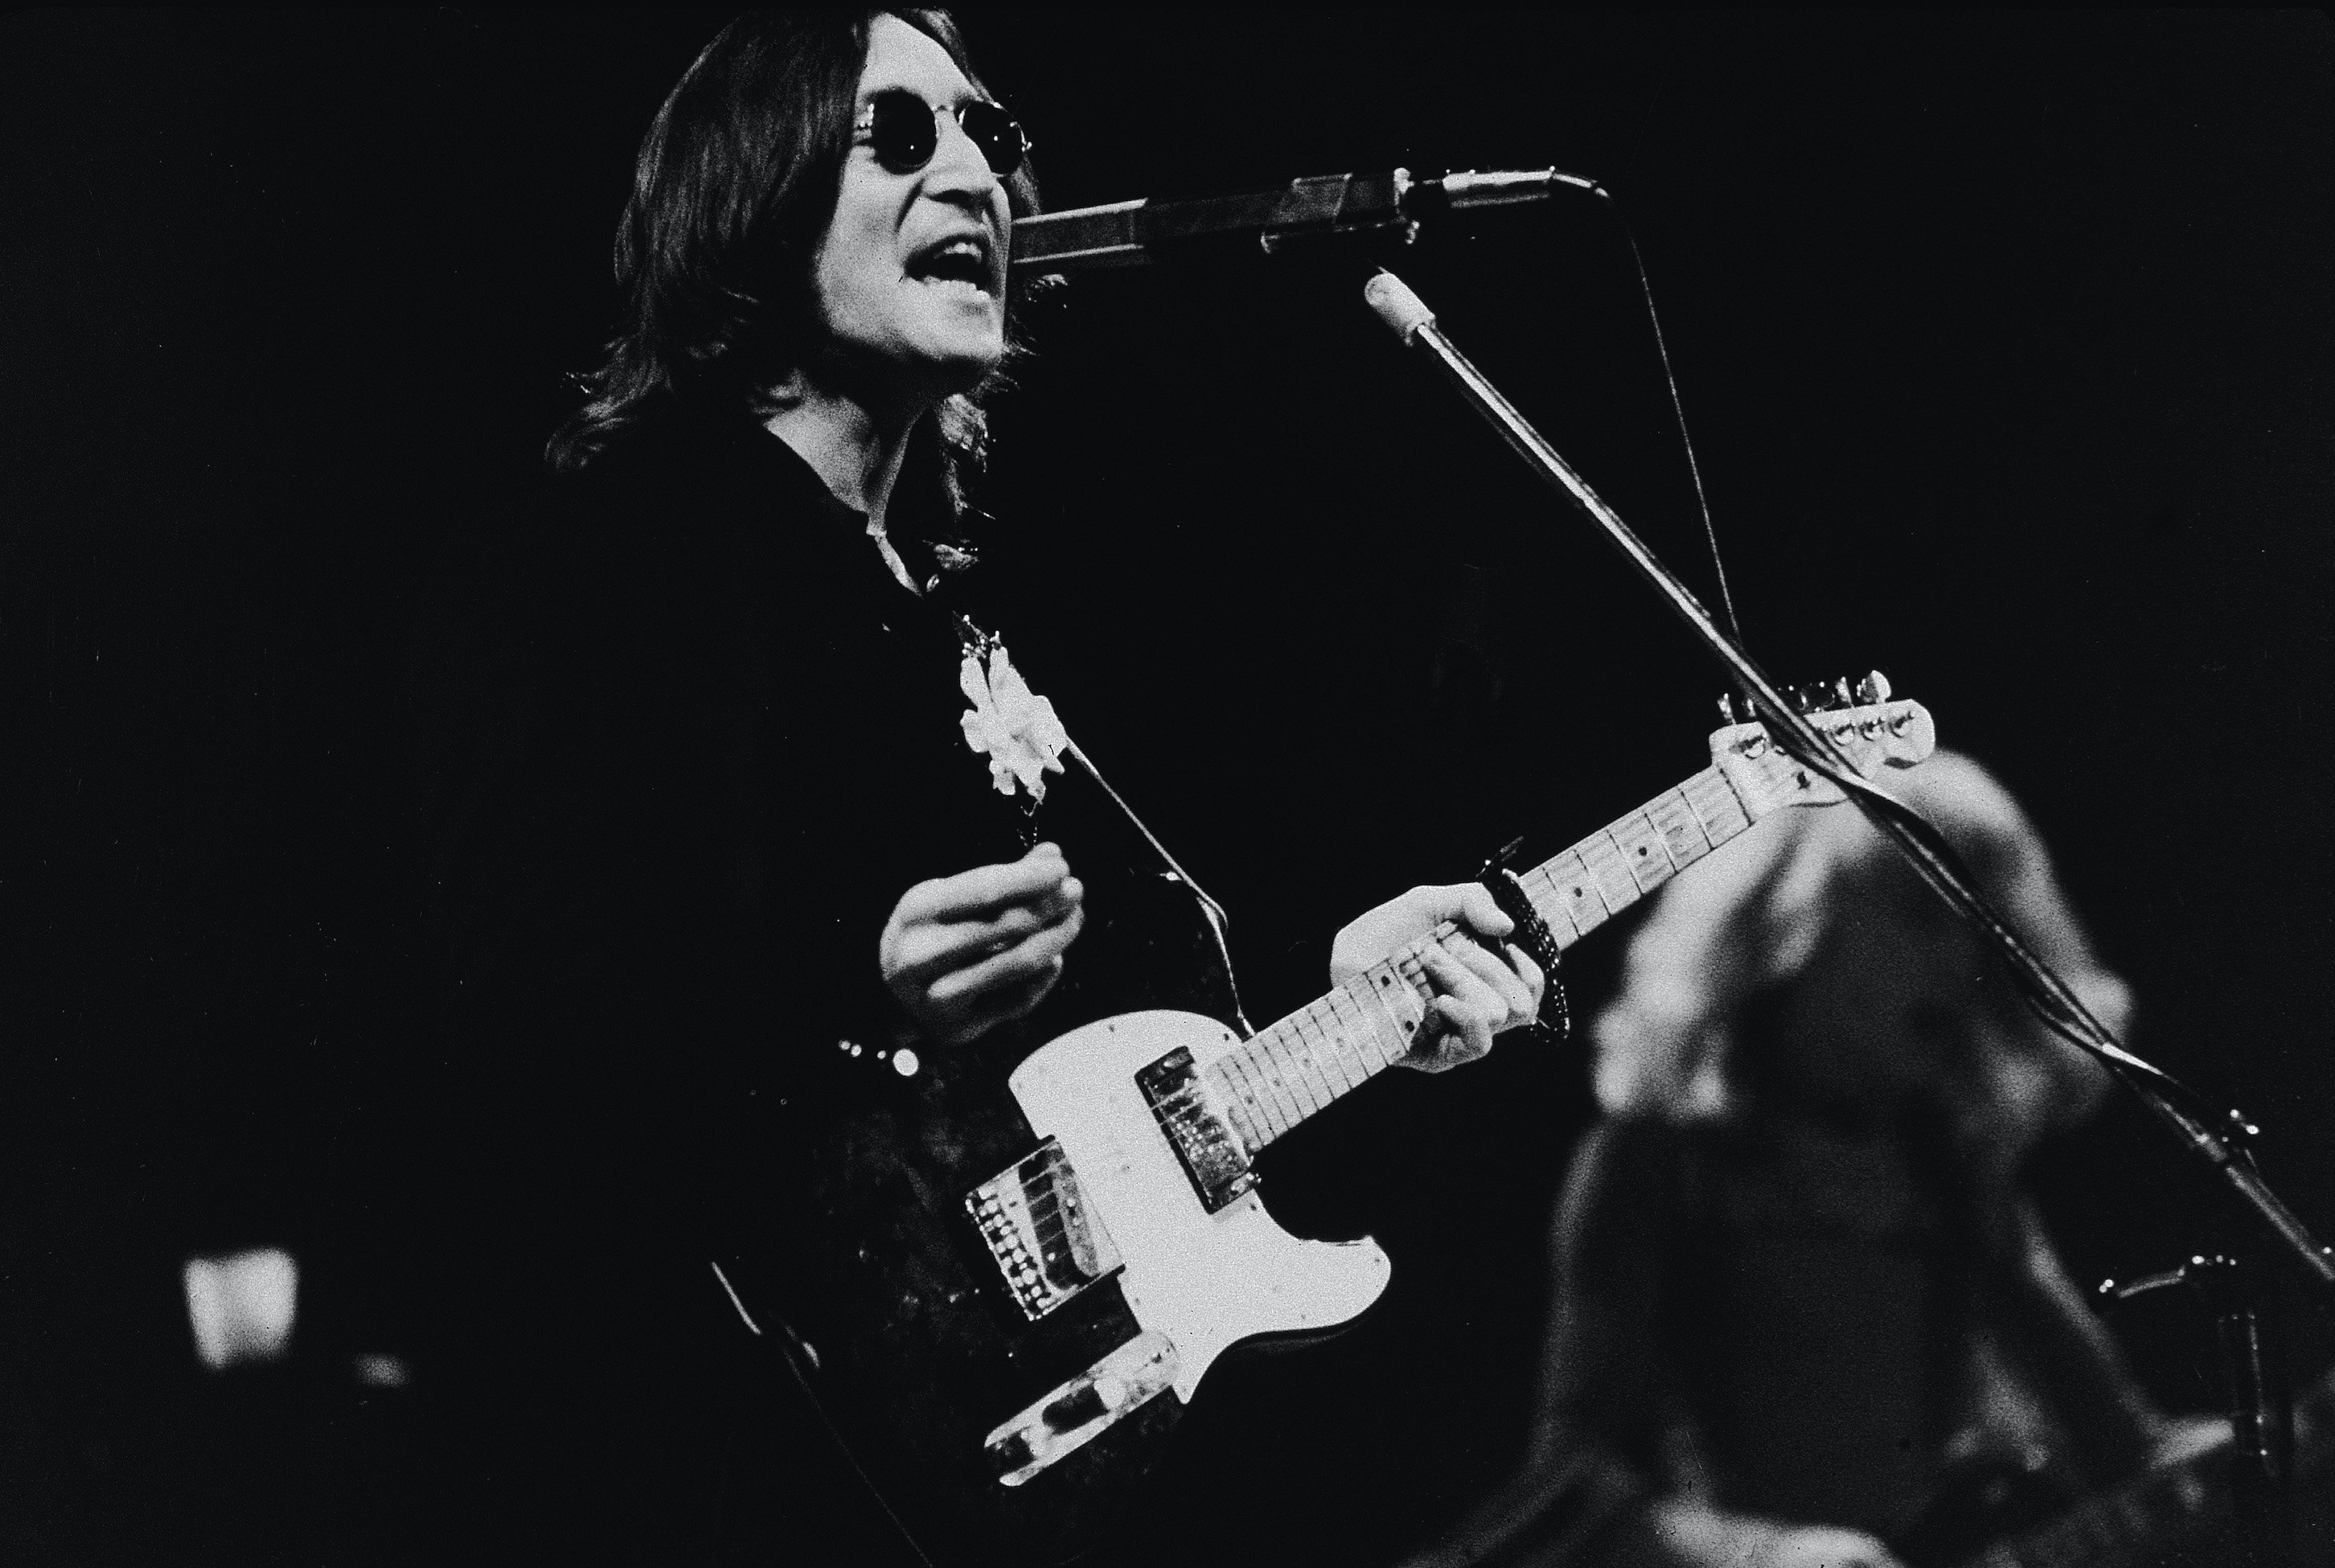 John Lennon performs onstage at Madison Square Garden